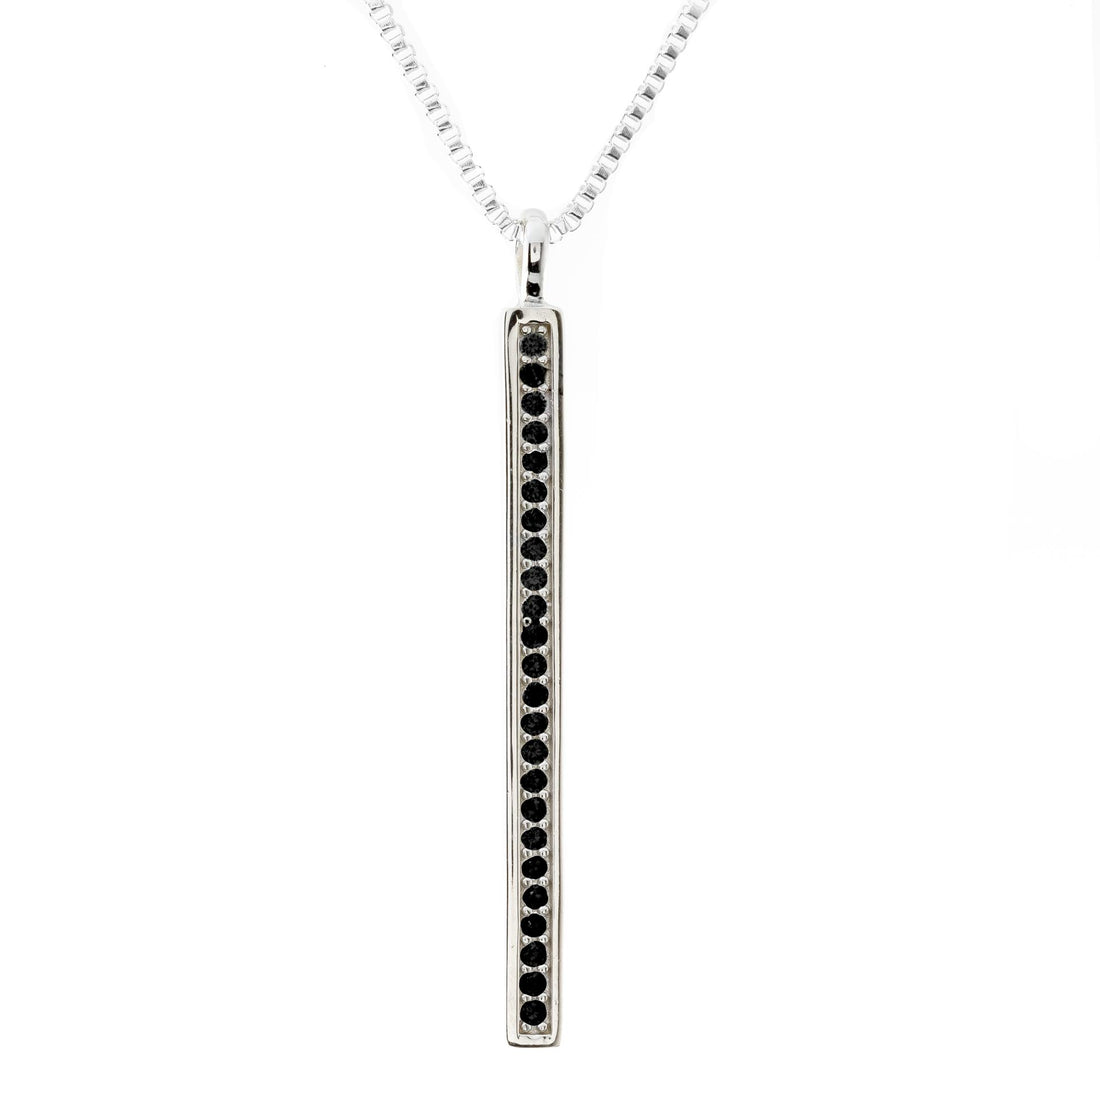 Solid Bar Black Rhinestone Sterling Silver Pendant With Triple Rhodium Coating (2 1/2 inch Long) Default Title